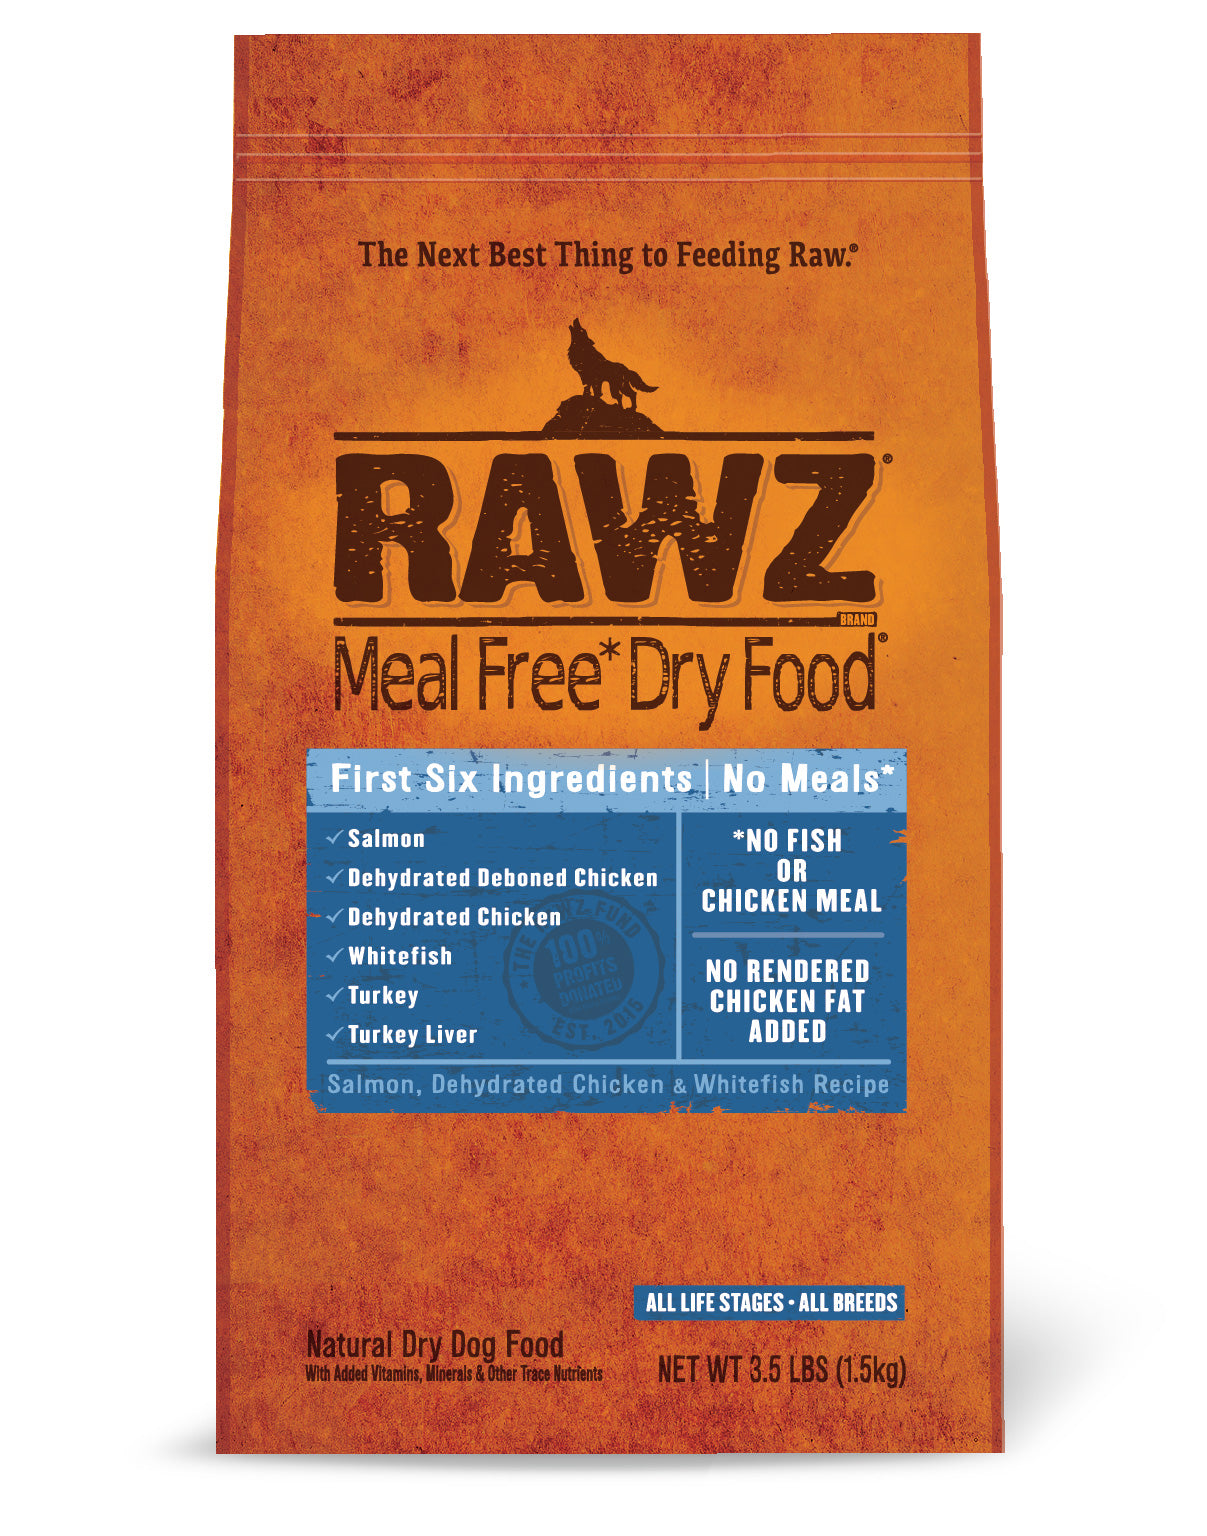 Rawz Meal Free Dehydrated Chicken, Salmon, and Whitefish